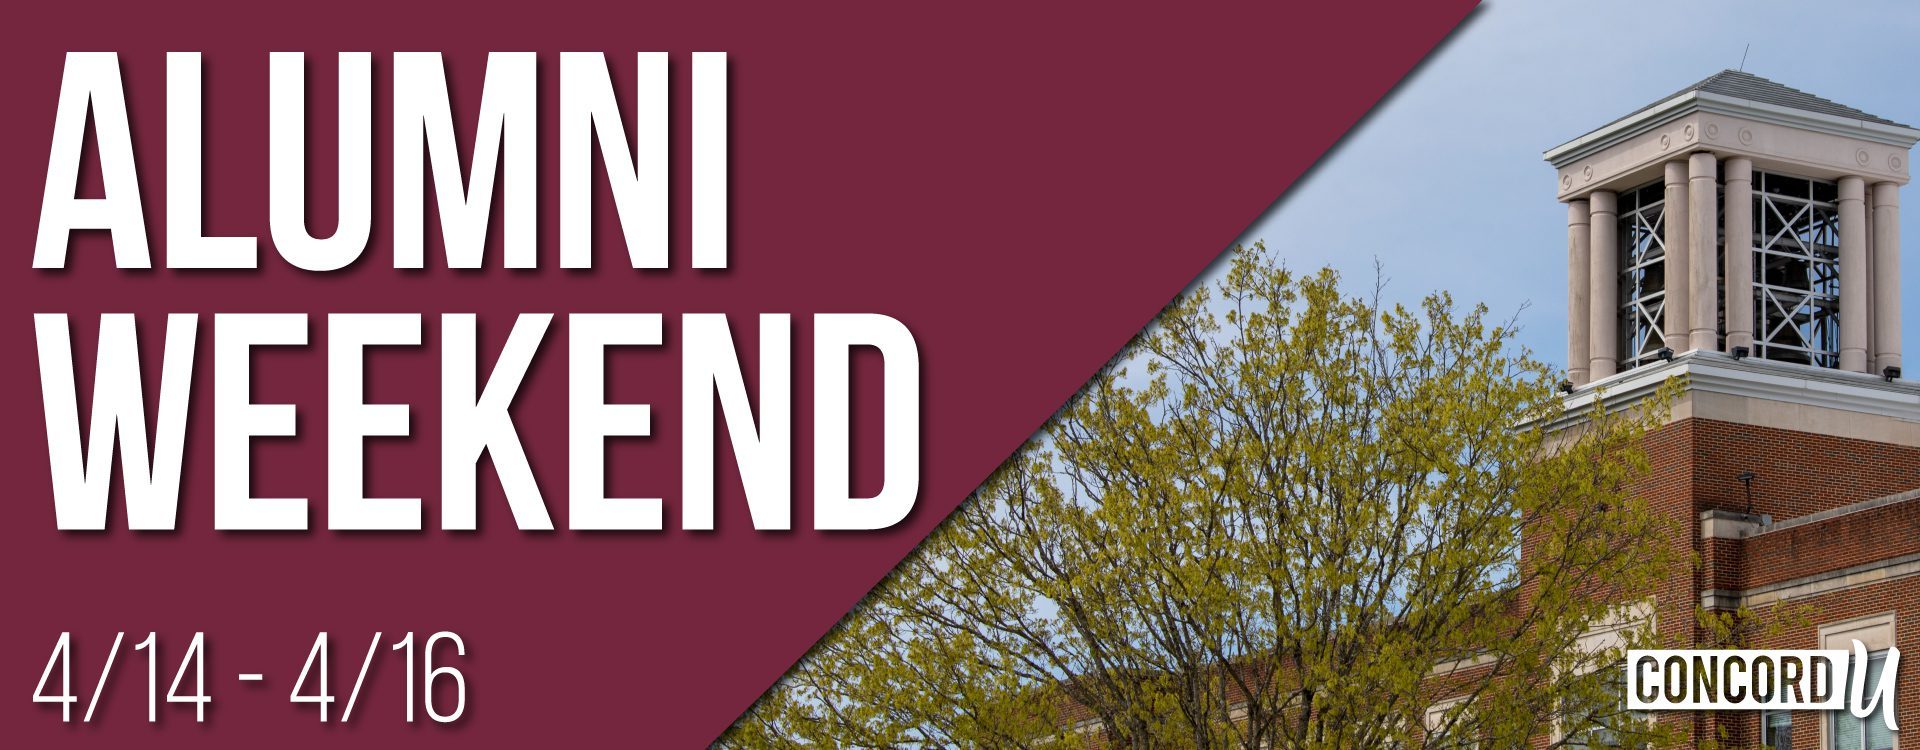 Join us for Alumni Weekend April 14 - 16!